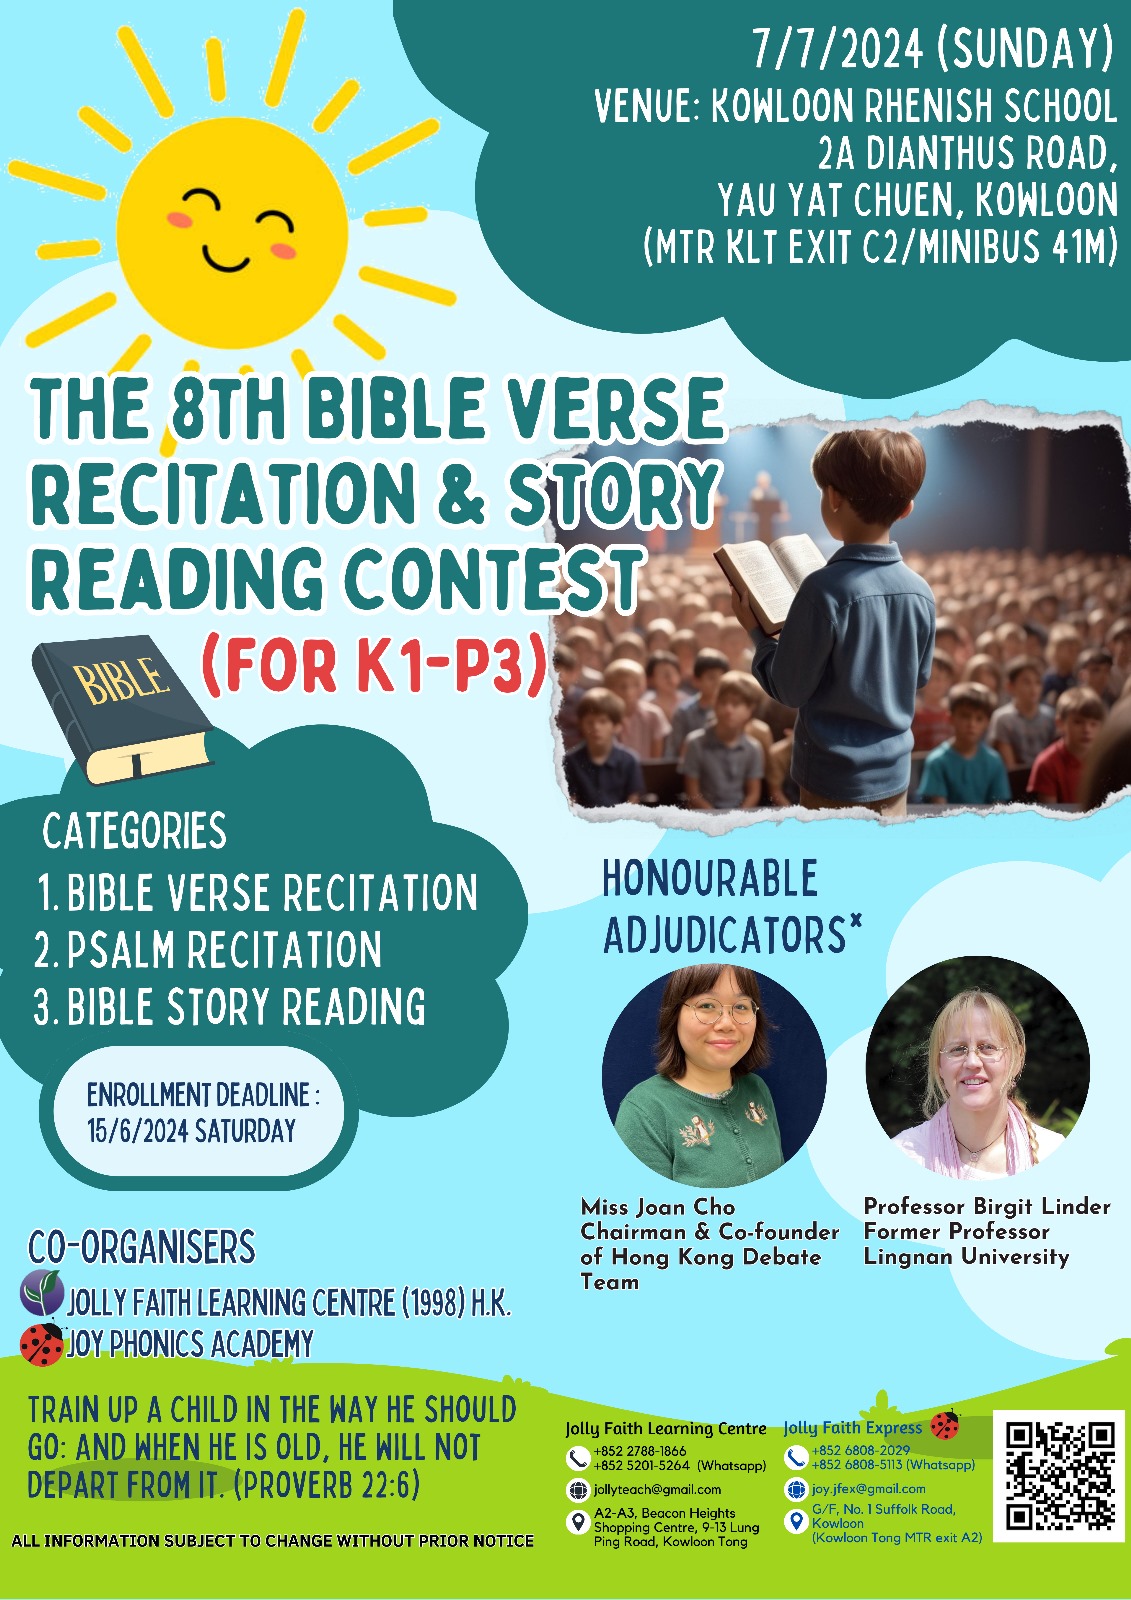 The 8th Bible Verse Recitation and Story Reading Contest